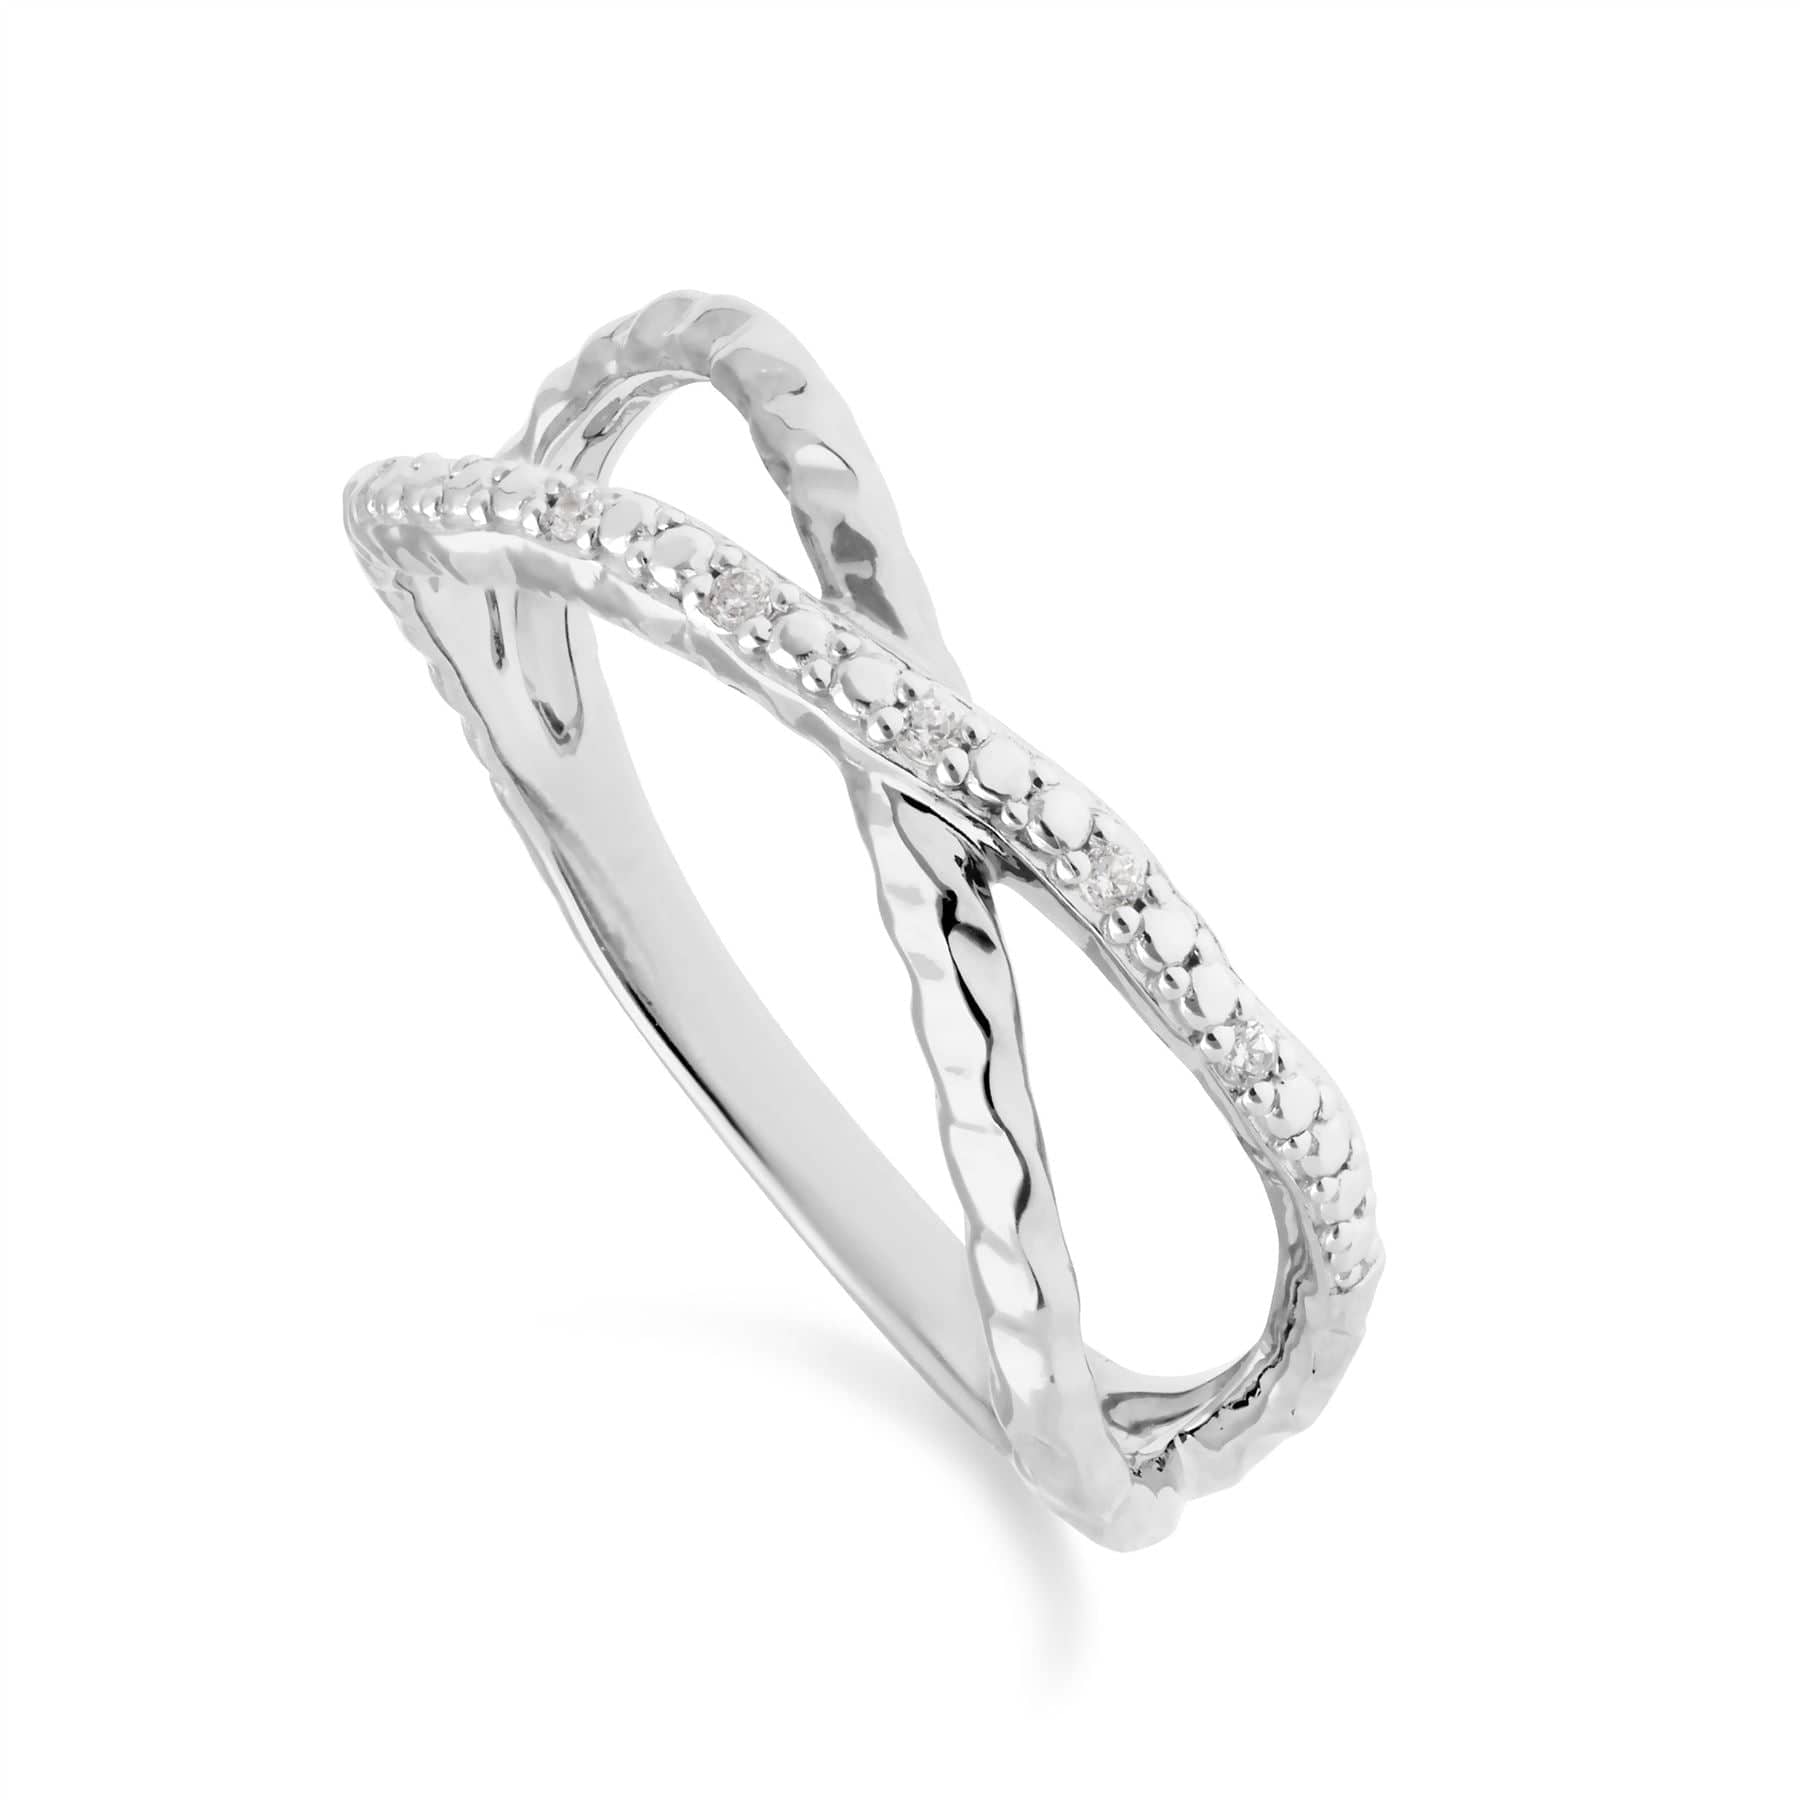 Diamond Pavé Hammered Crossover Ring in 9ct White Gold